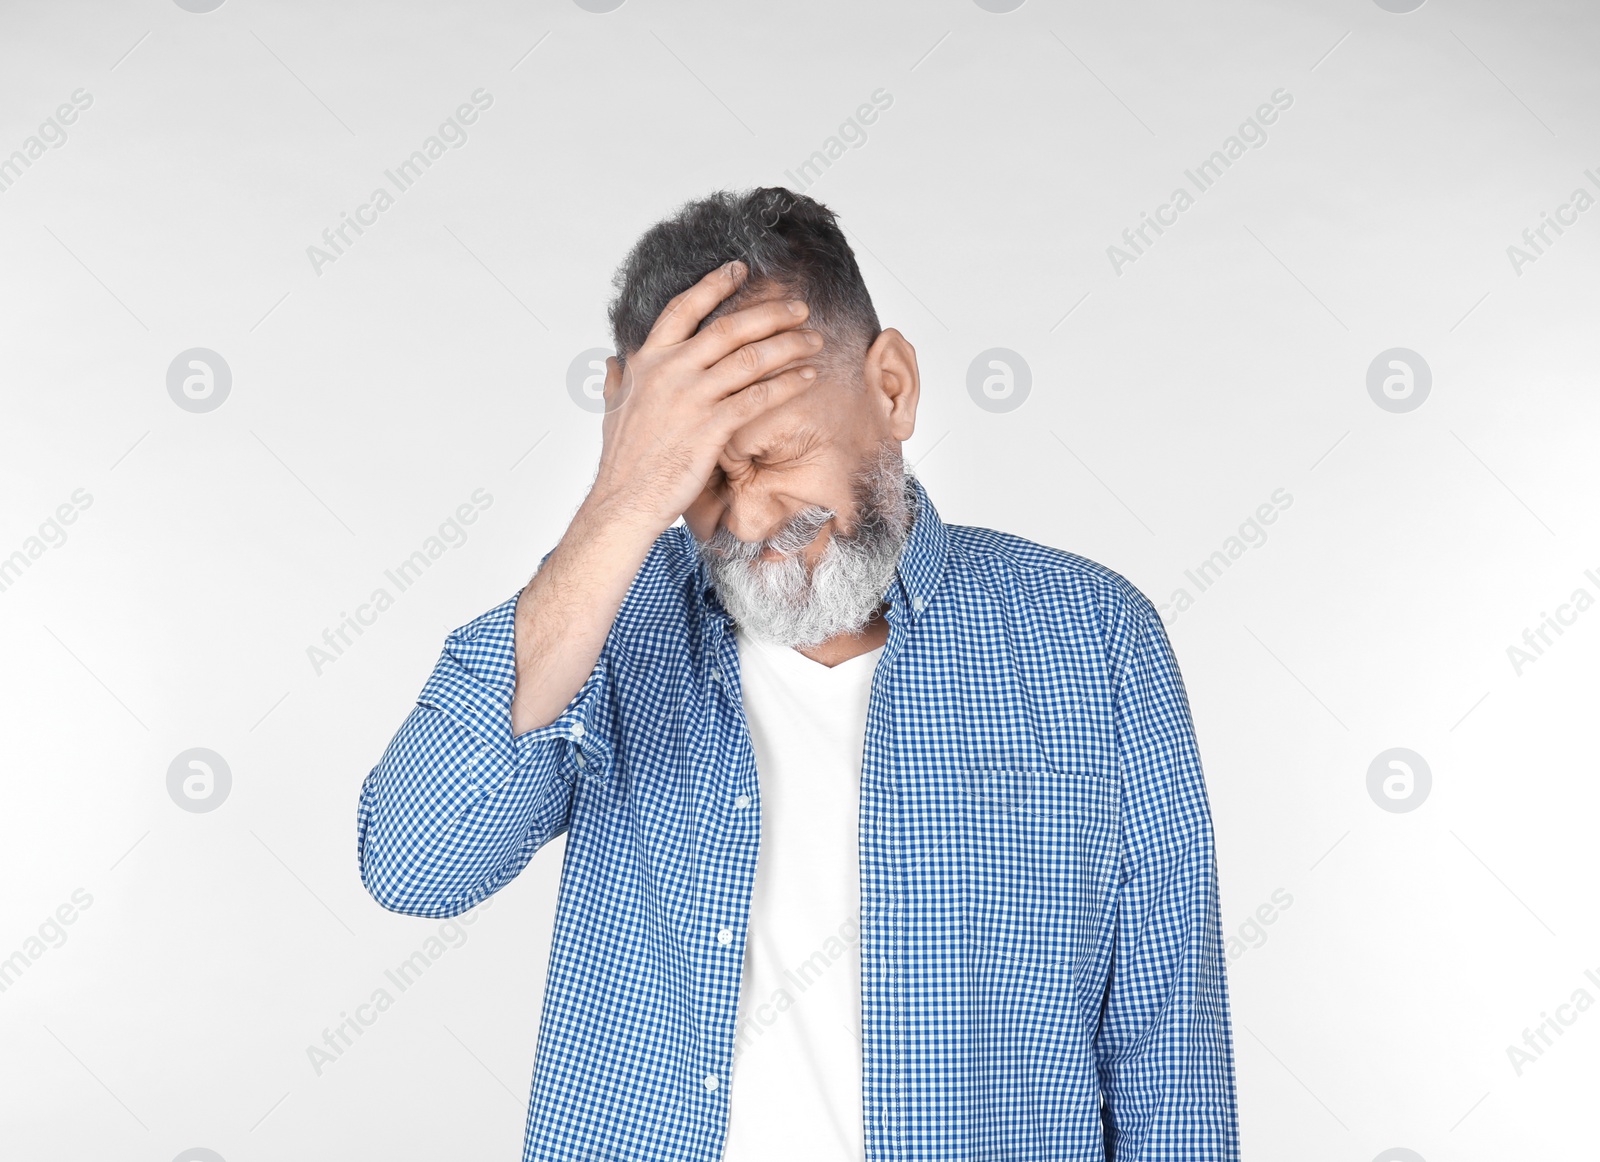 Photo of Man suffering from headache on light background